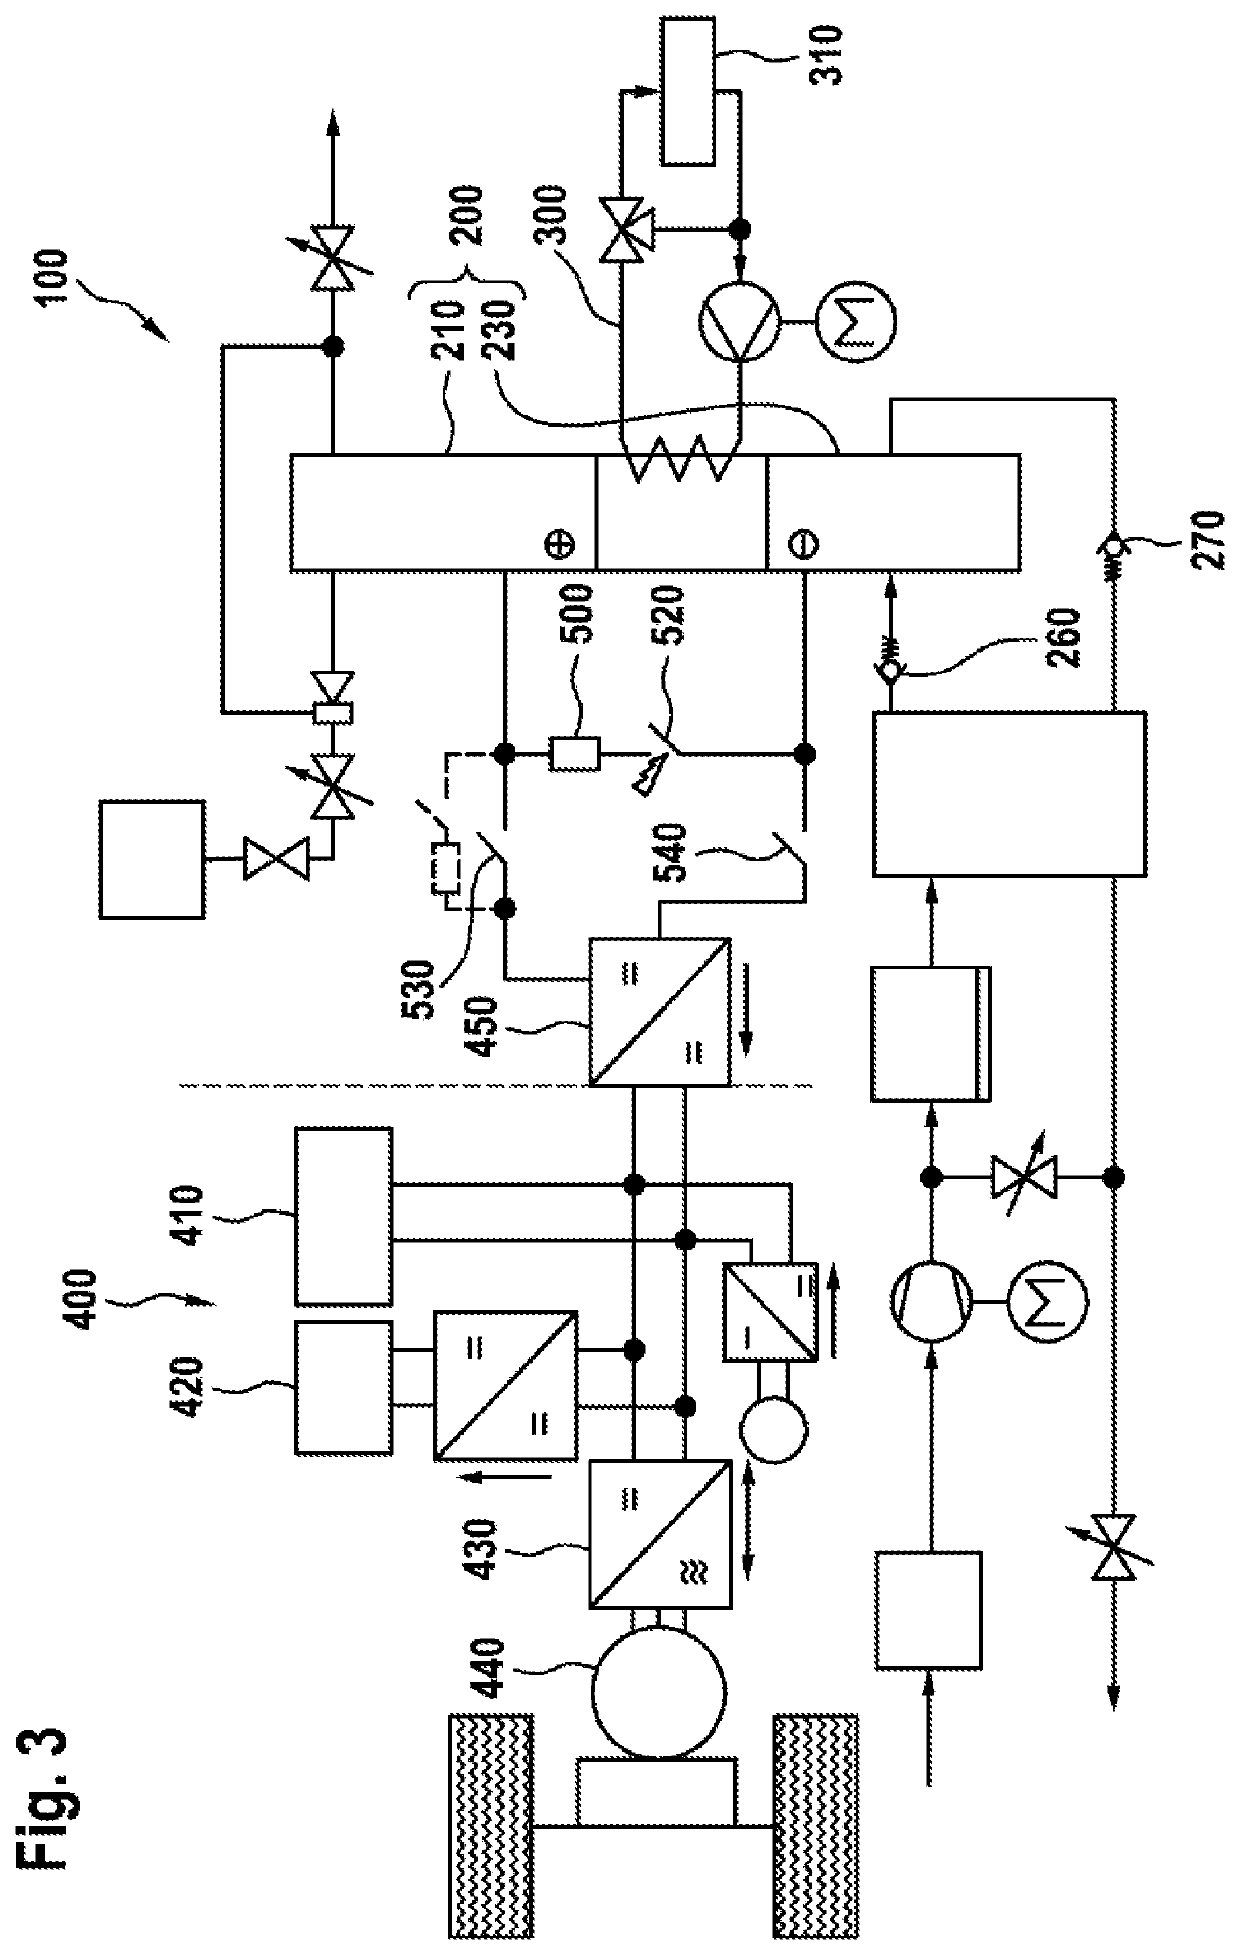 Intrinsically safe bleed-down circuit and control strategy for fuel cell systems